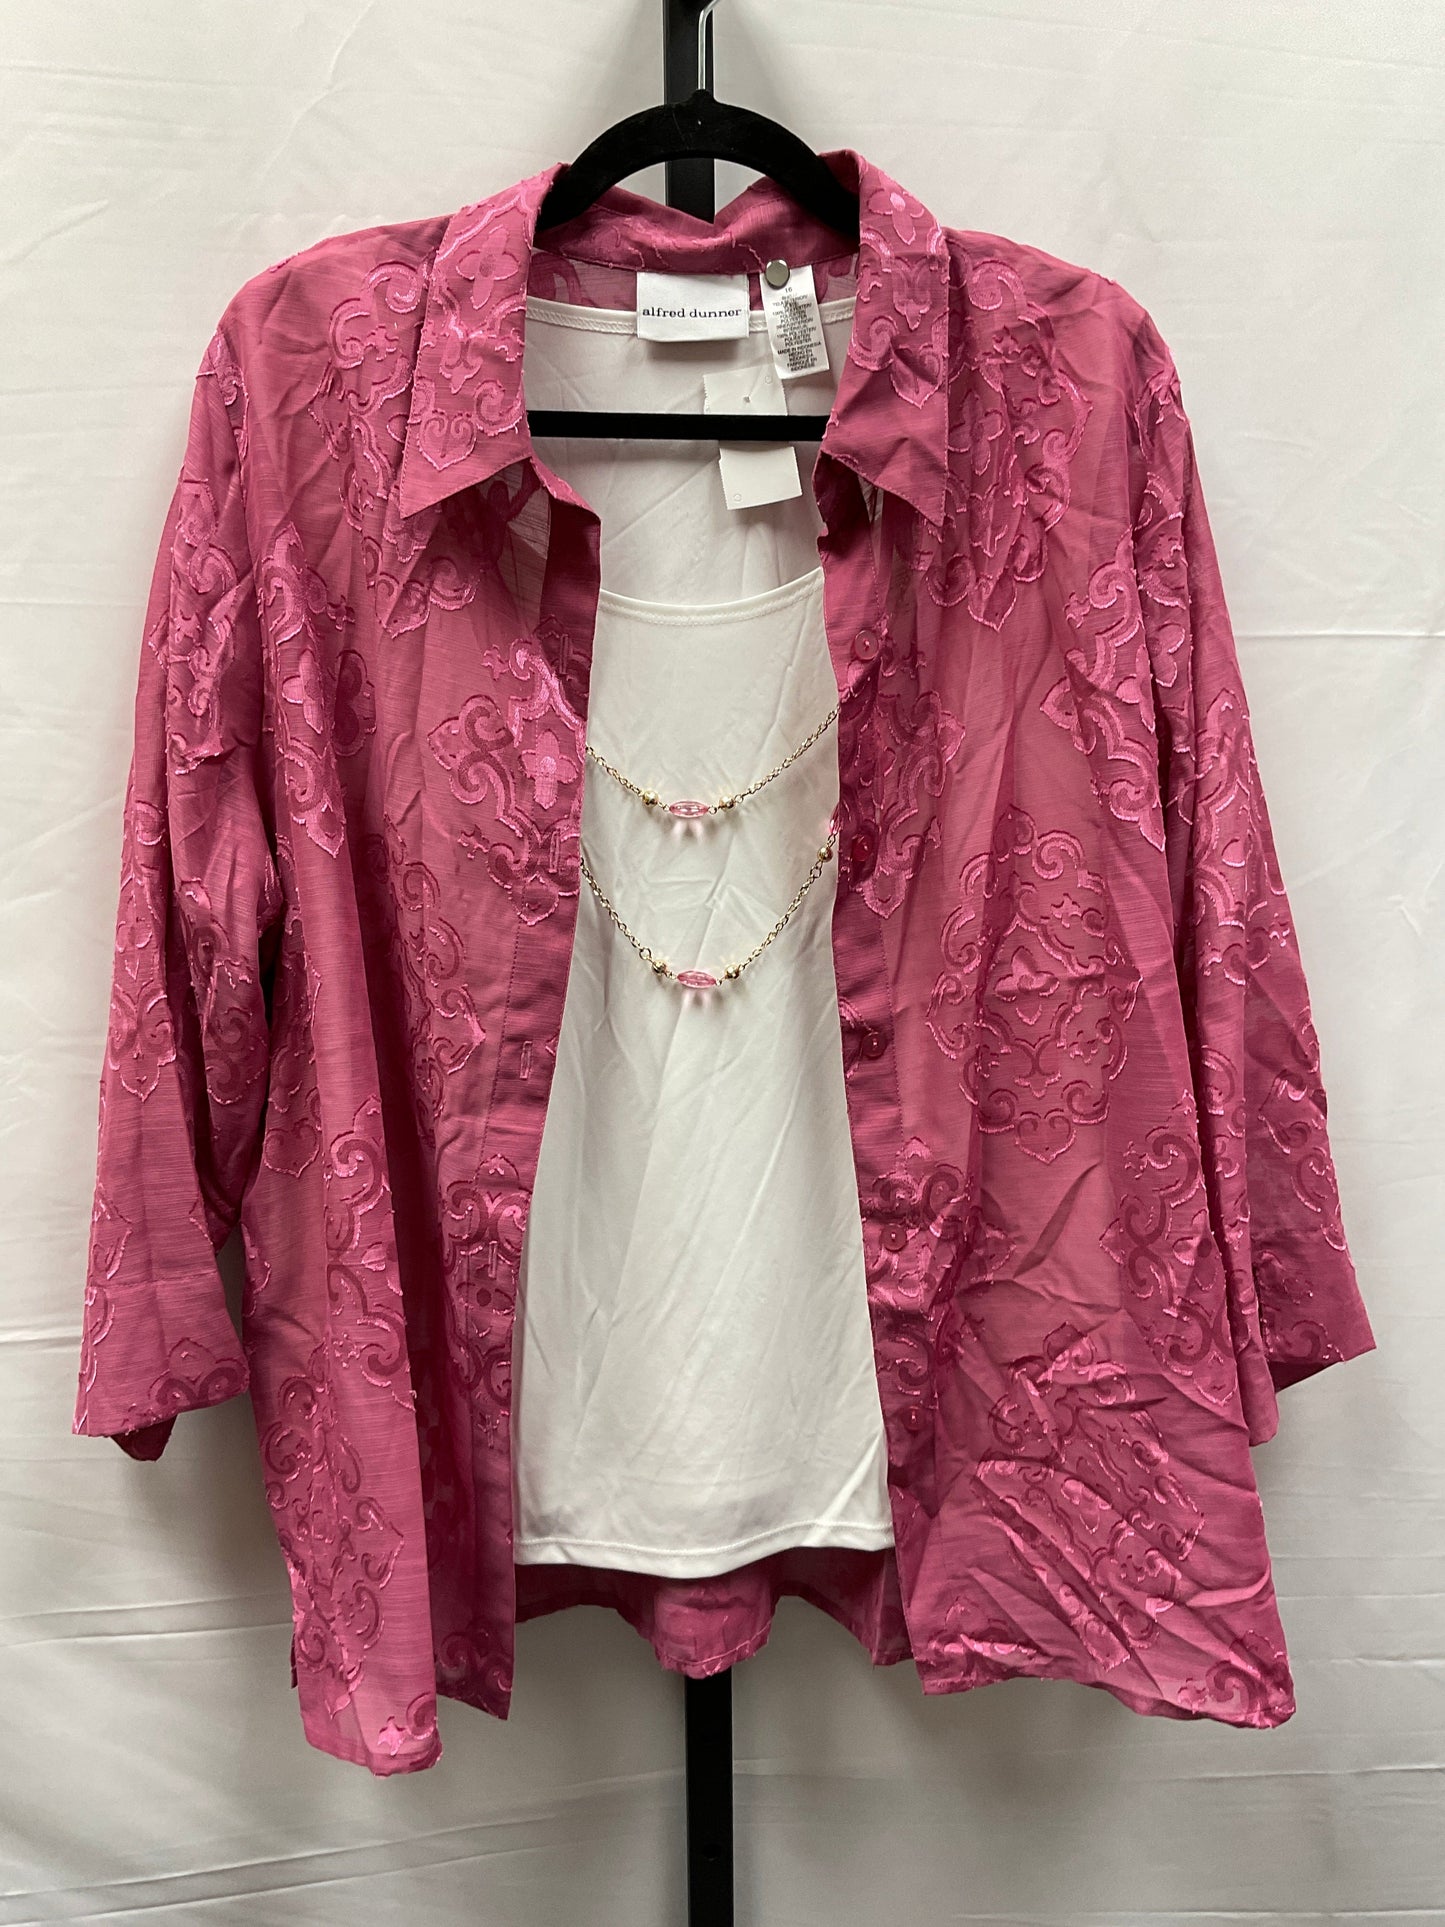 Pink & White Top Long Sleeve Alfred Dunner, Size Xl